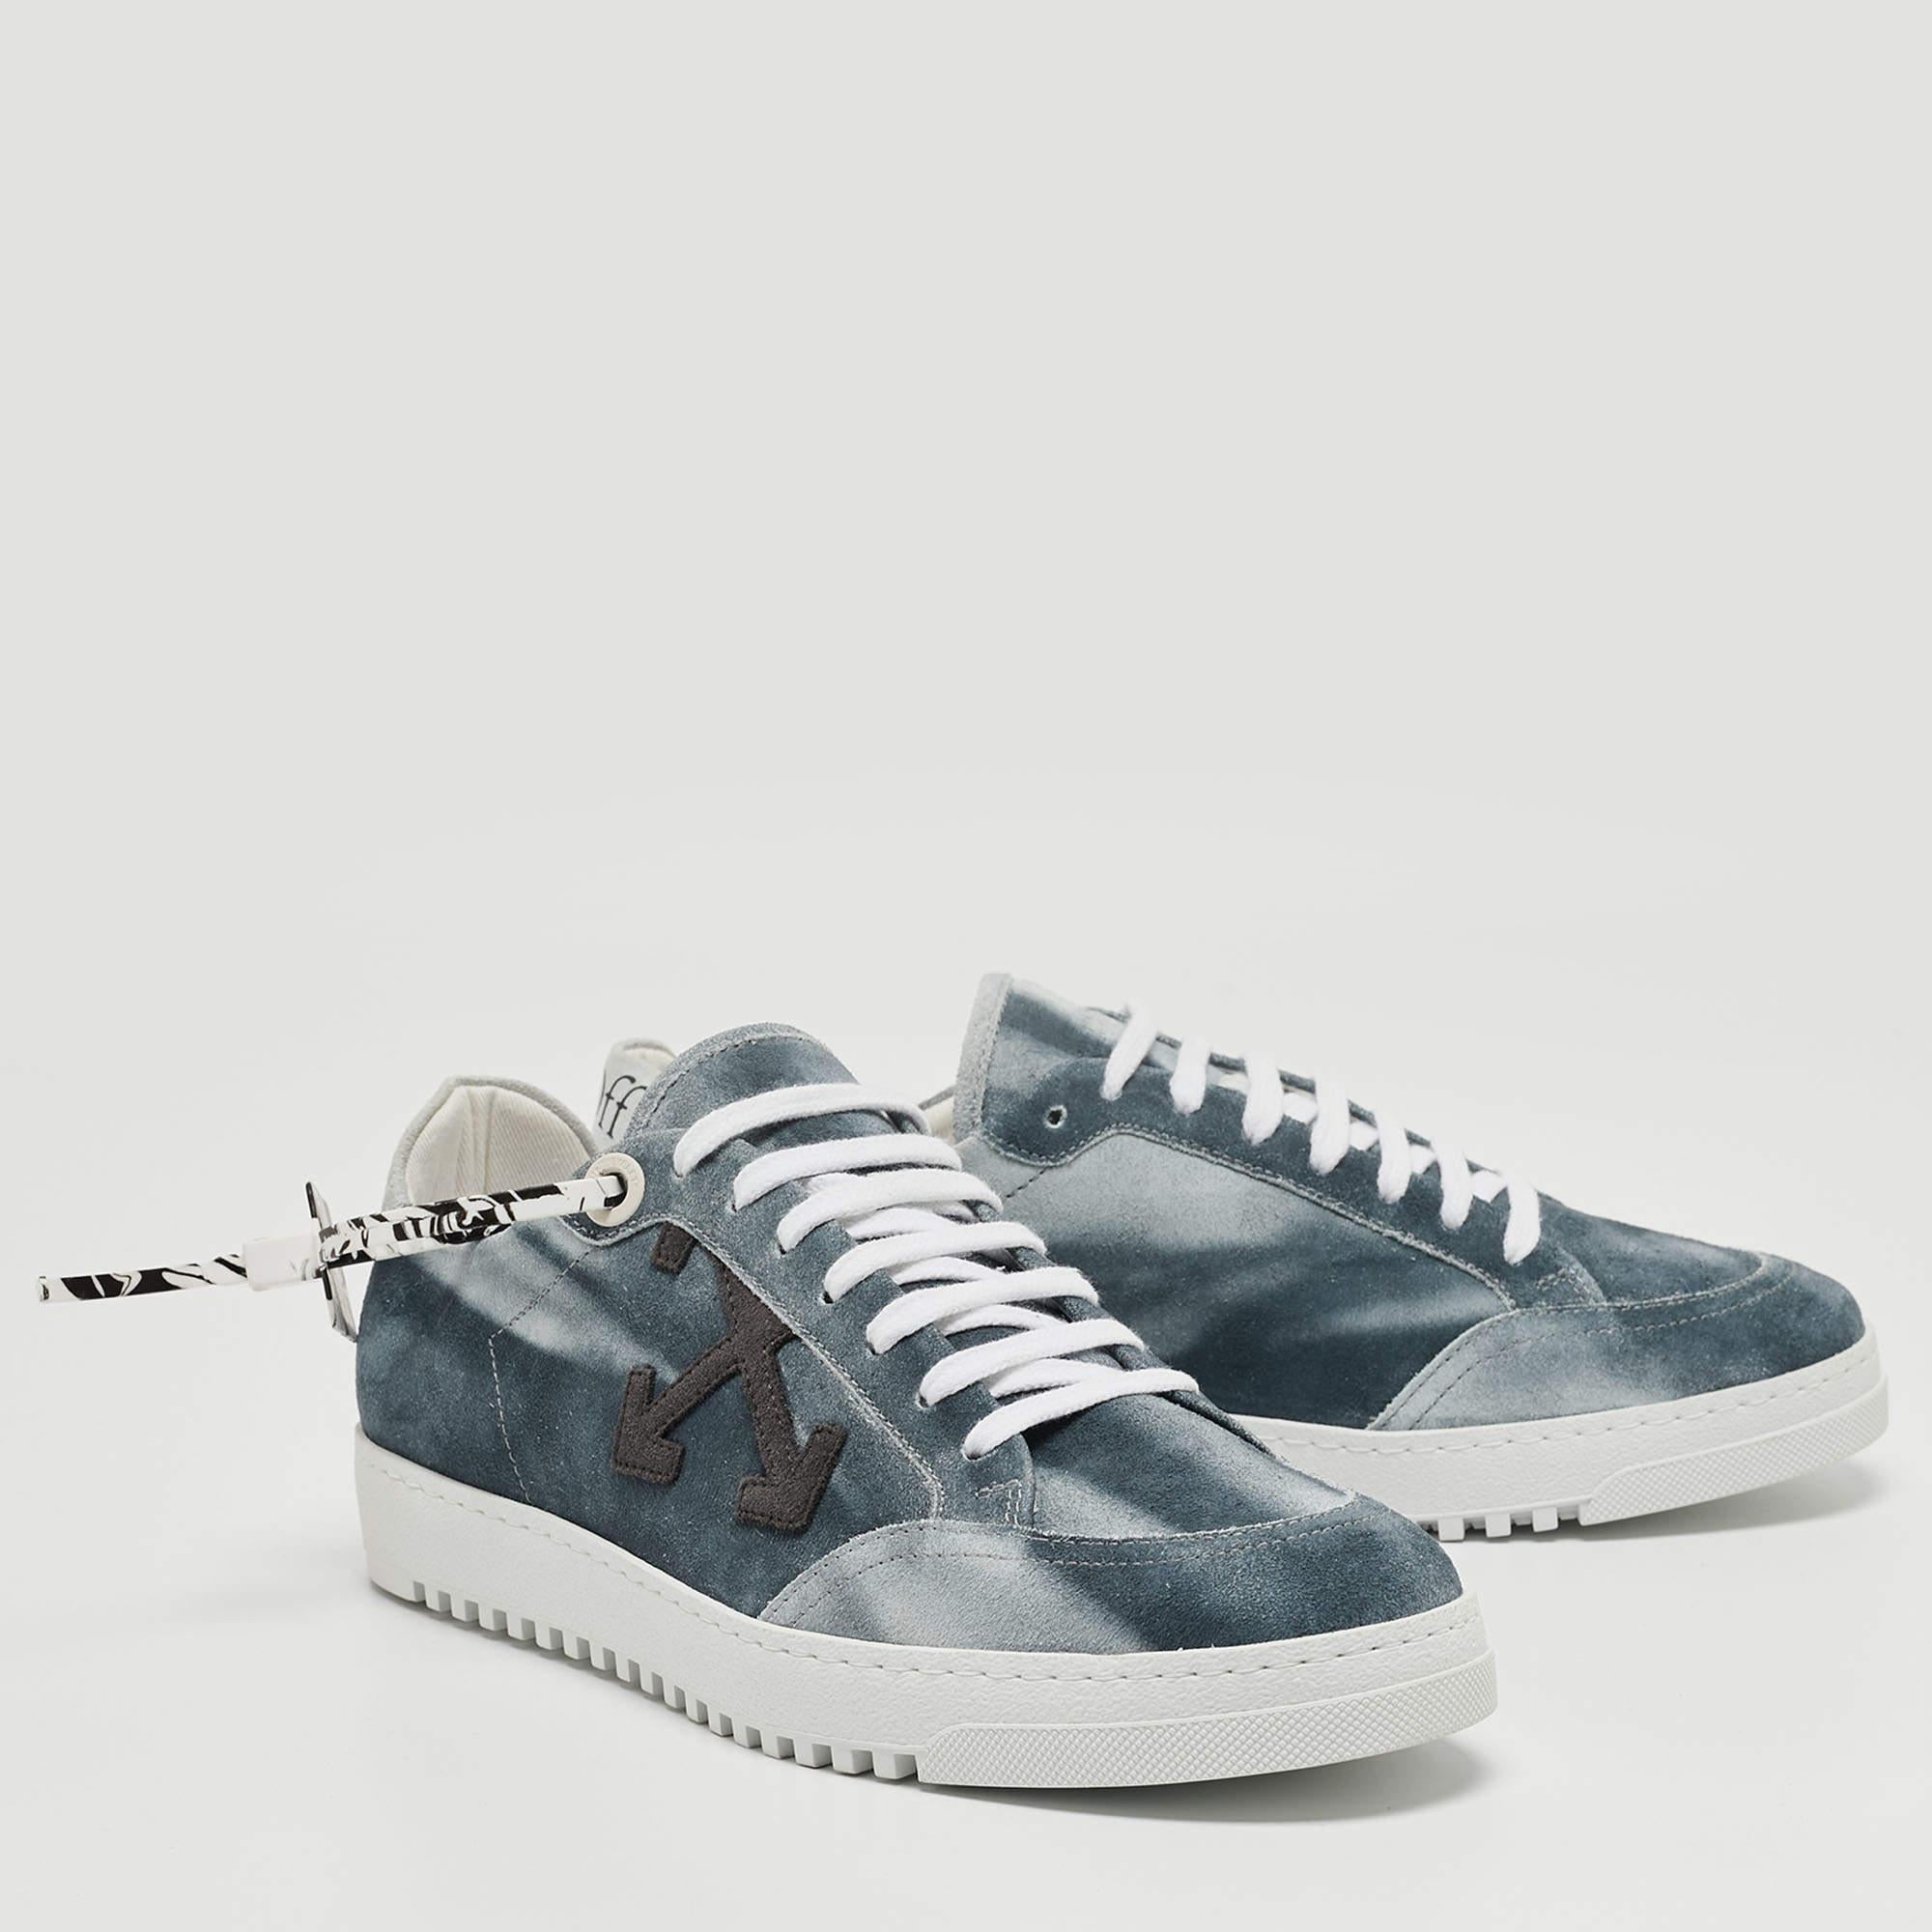 Off-White Blue/Grey Suede 2.0 Low Top Sneakers Size 41 For Sale 1